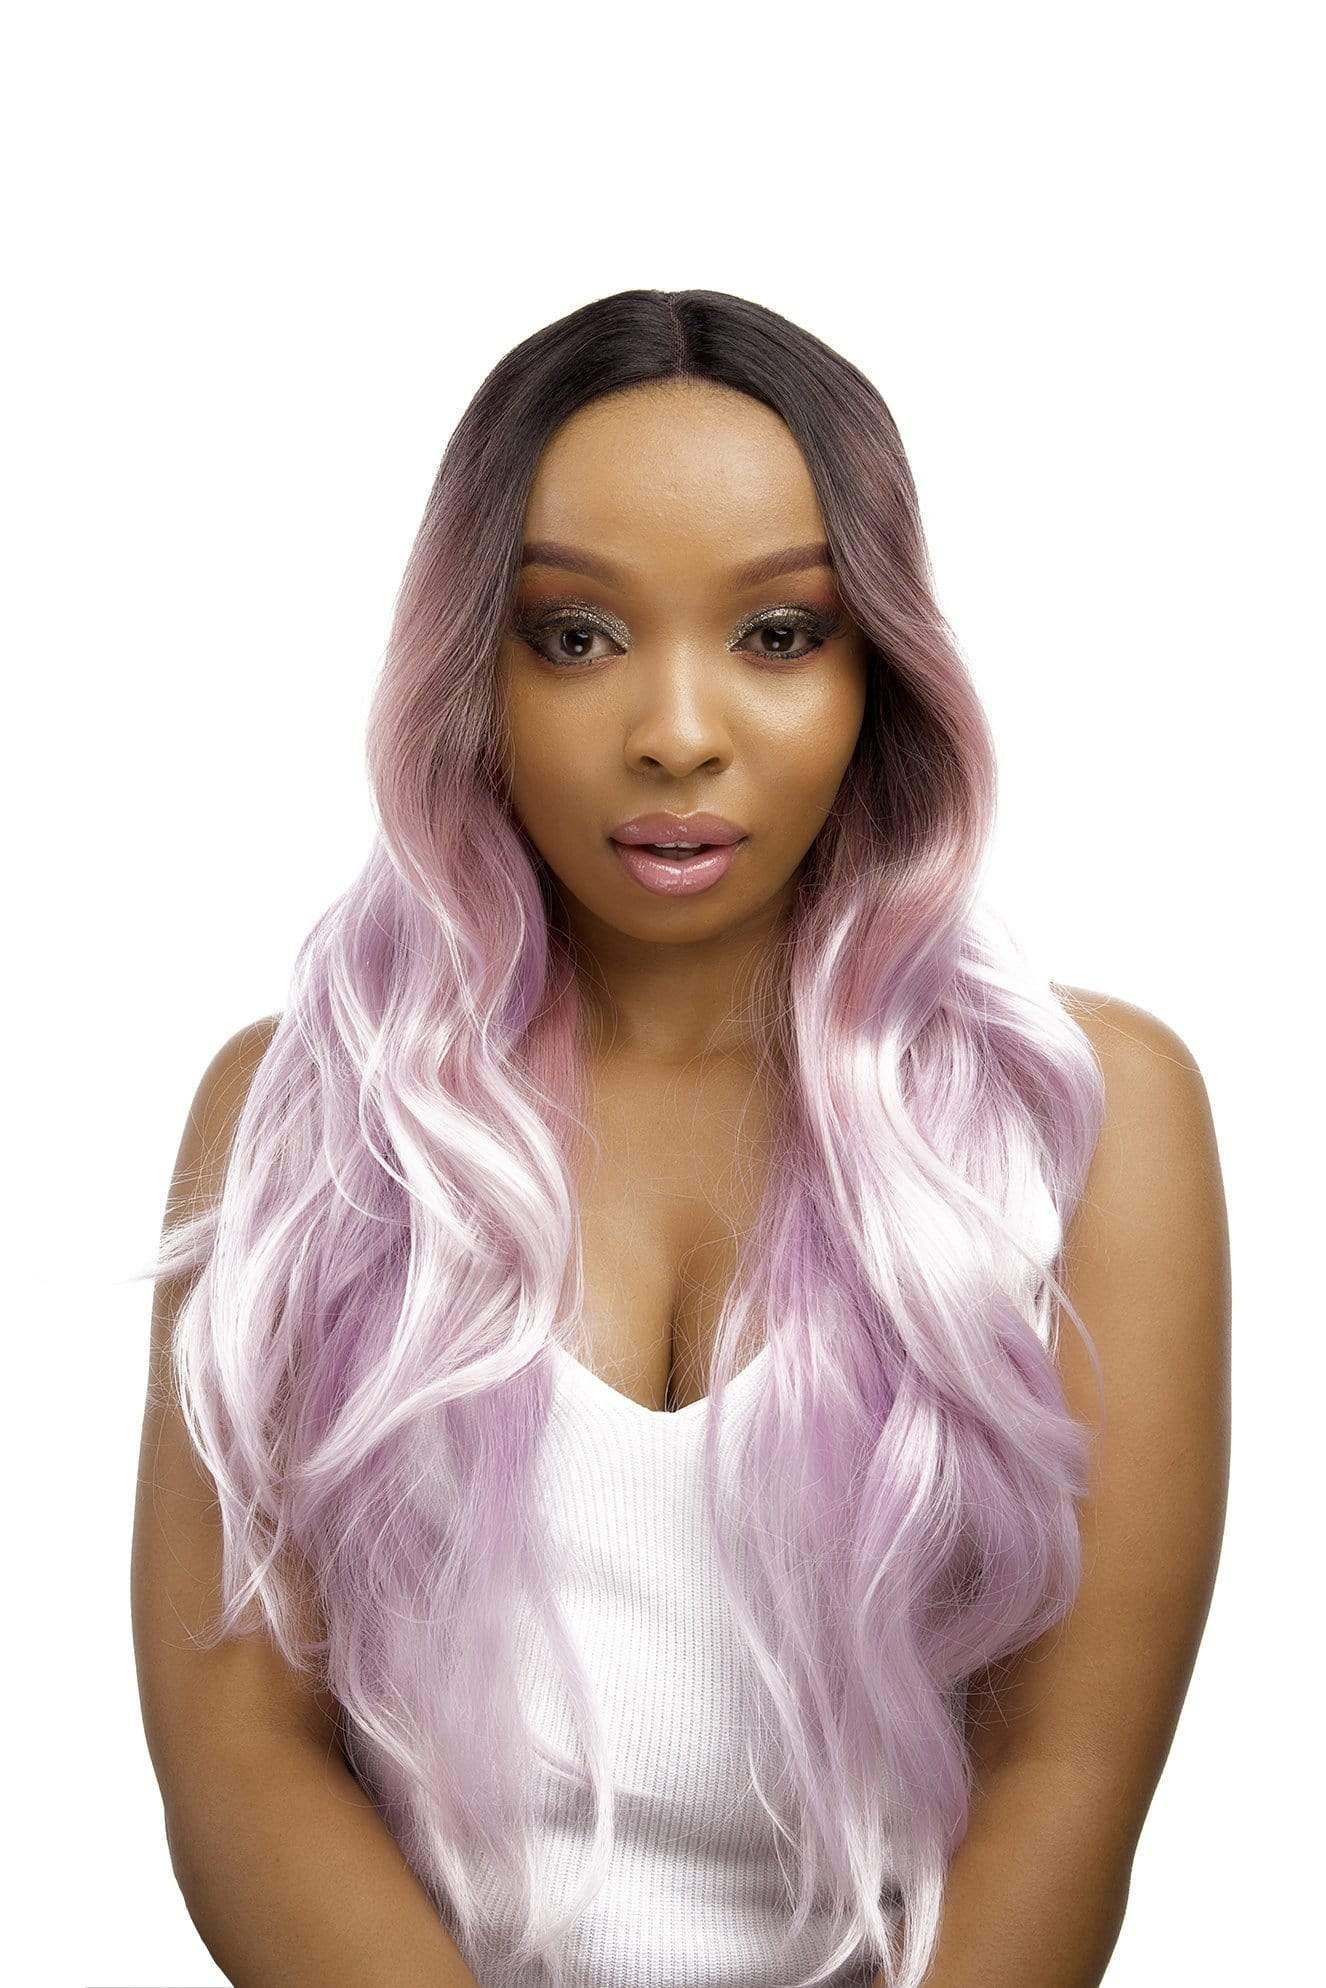 Candy floss Wig Long Straight Middle Part Synthetic Hair Pink Ombré